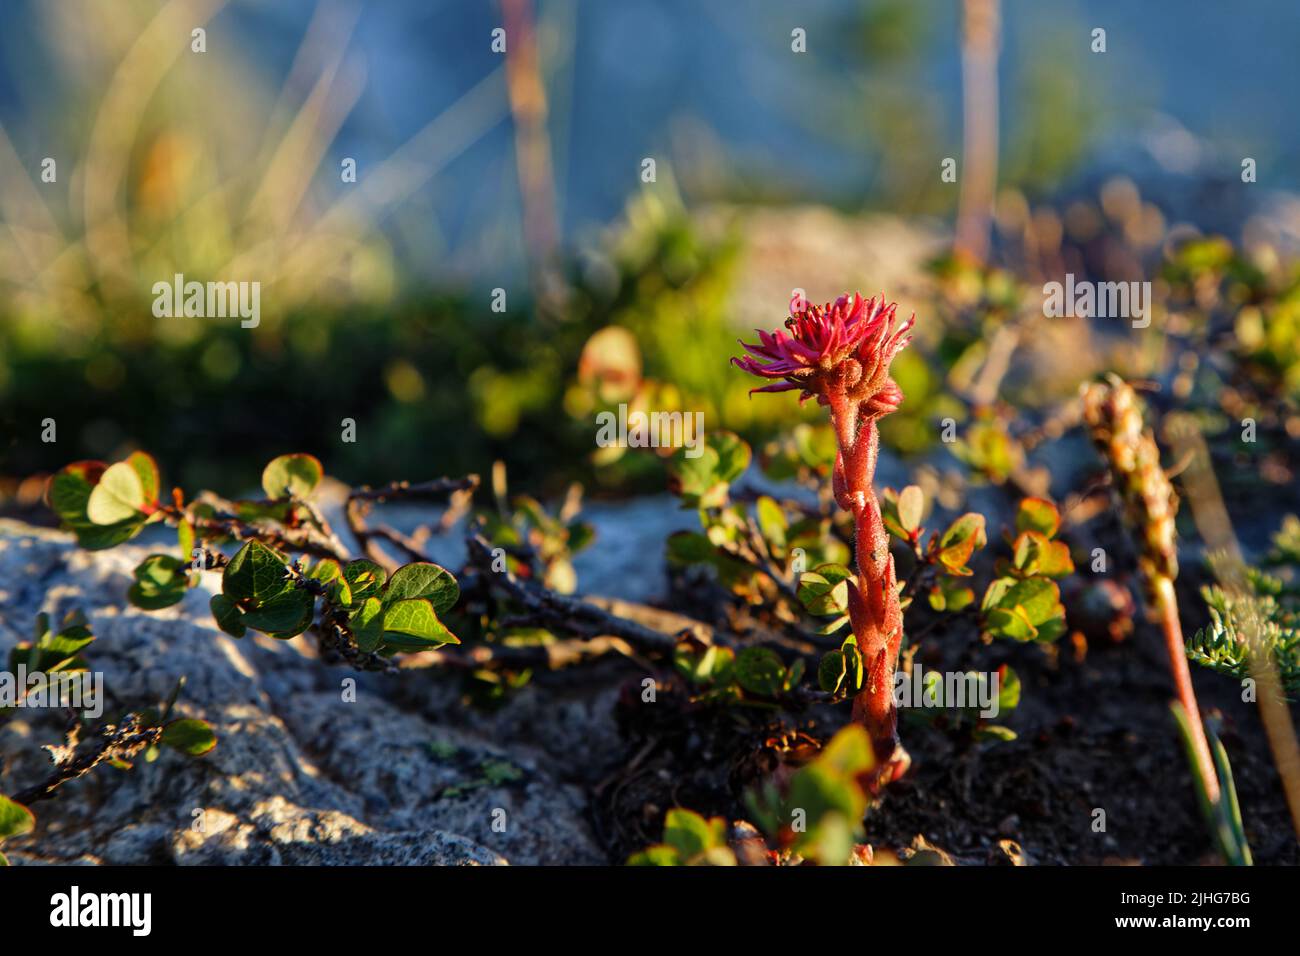 Sempervivum arachnoideum, the cobweb house-leek, a flowering plant in the family Crassulaceae, native to European mountains, in the Alps. Stock Photo